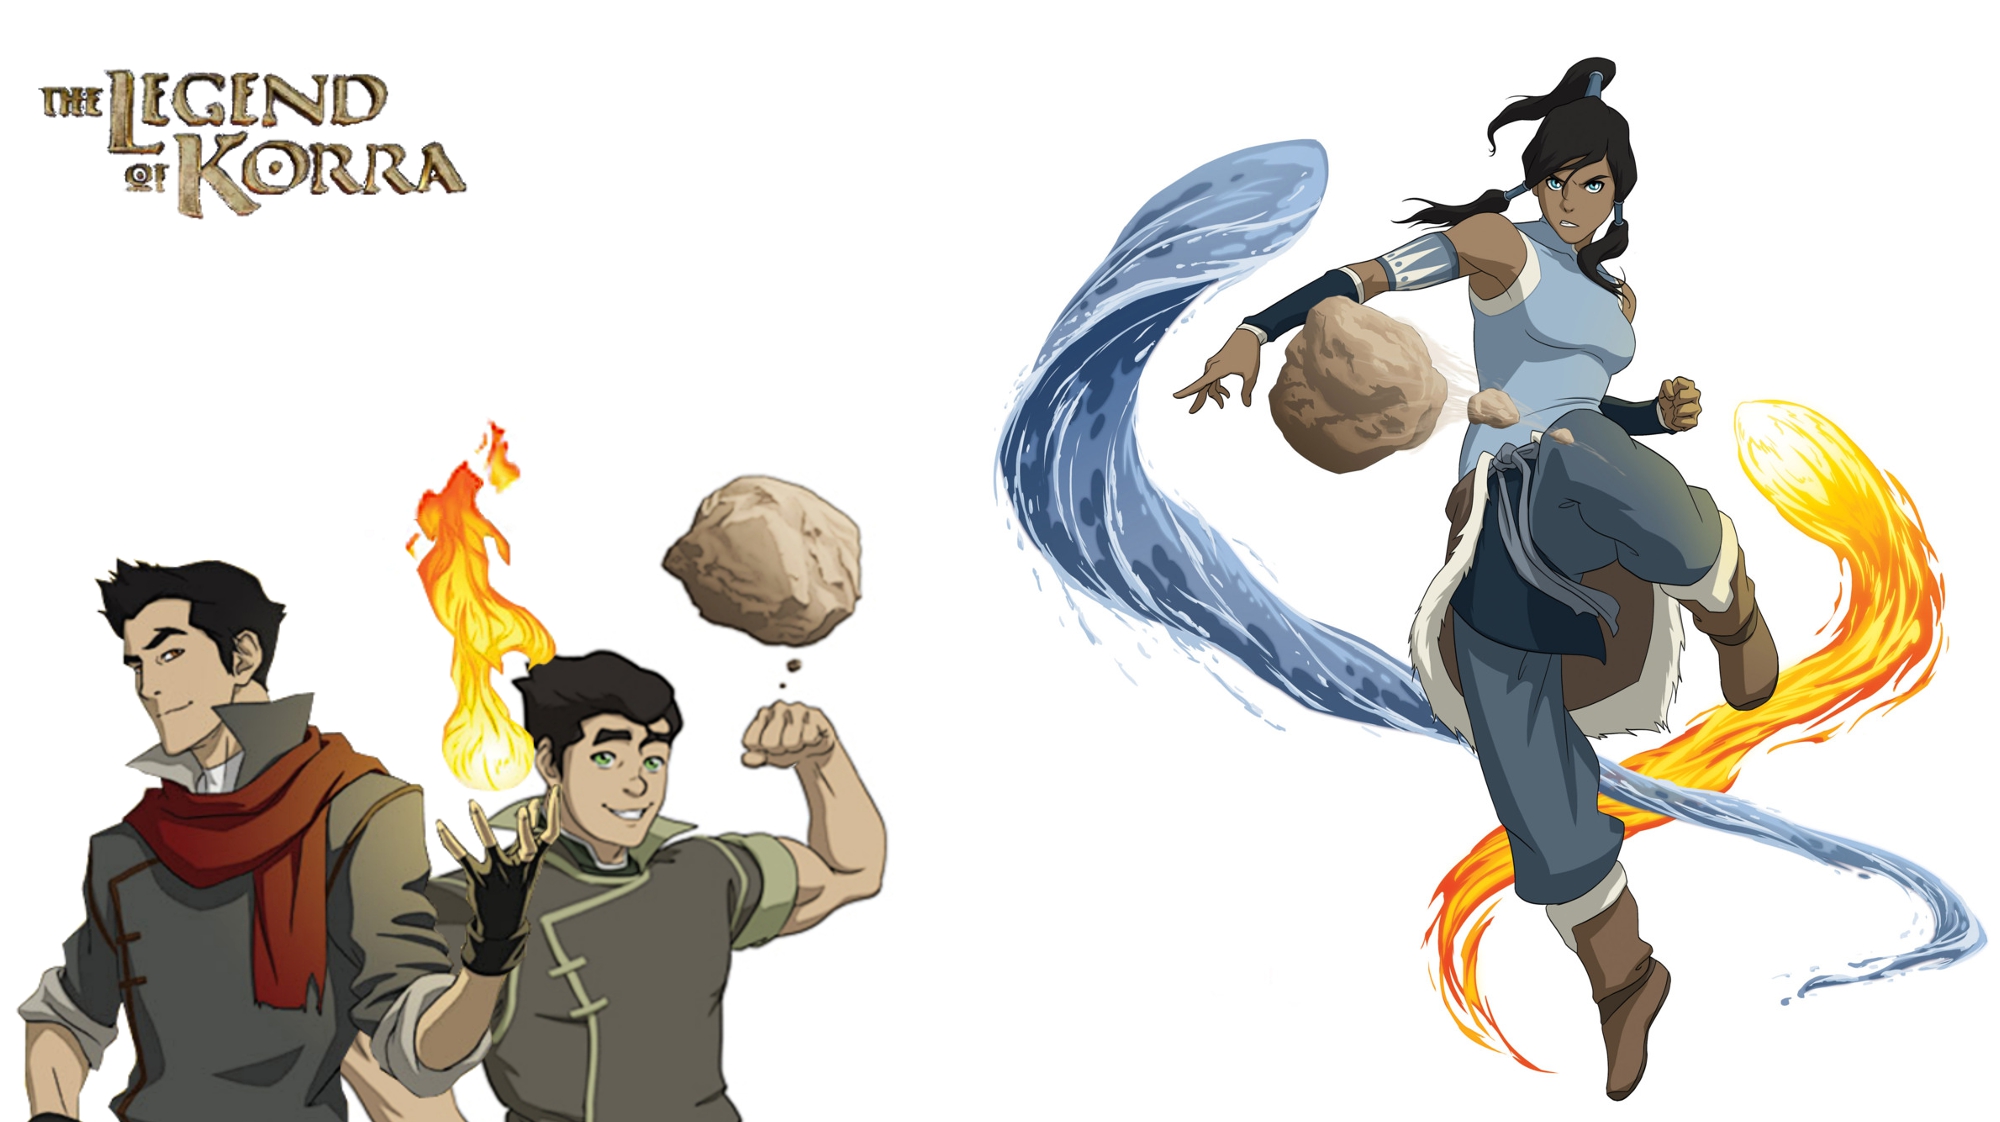 Avatar: The Legend Of Korra Backgrounds, Compatible - PC, Mobile, Gadgets| 2000x1122 px